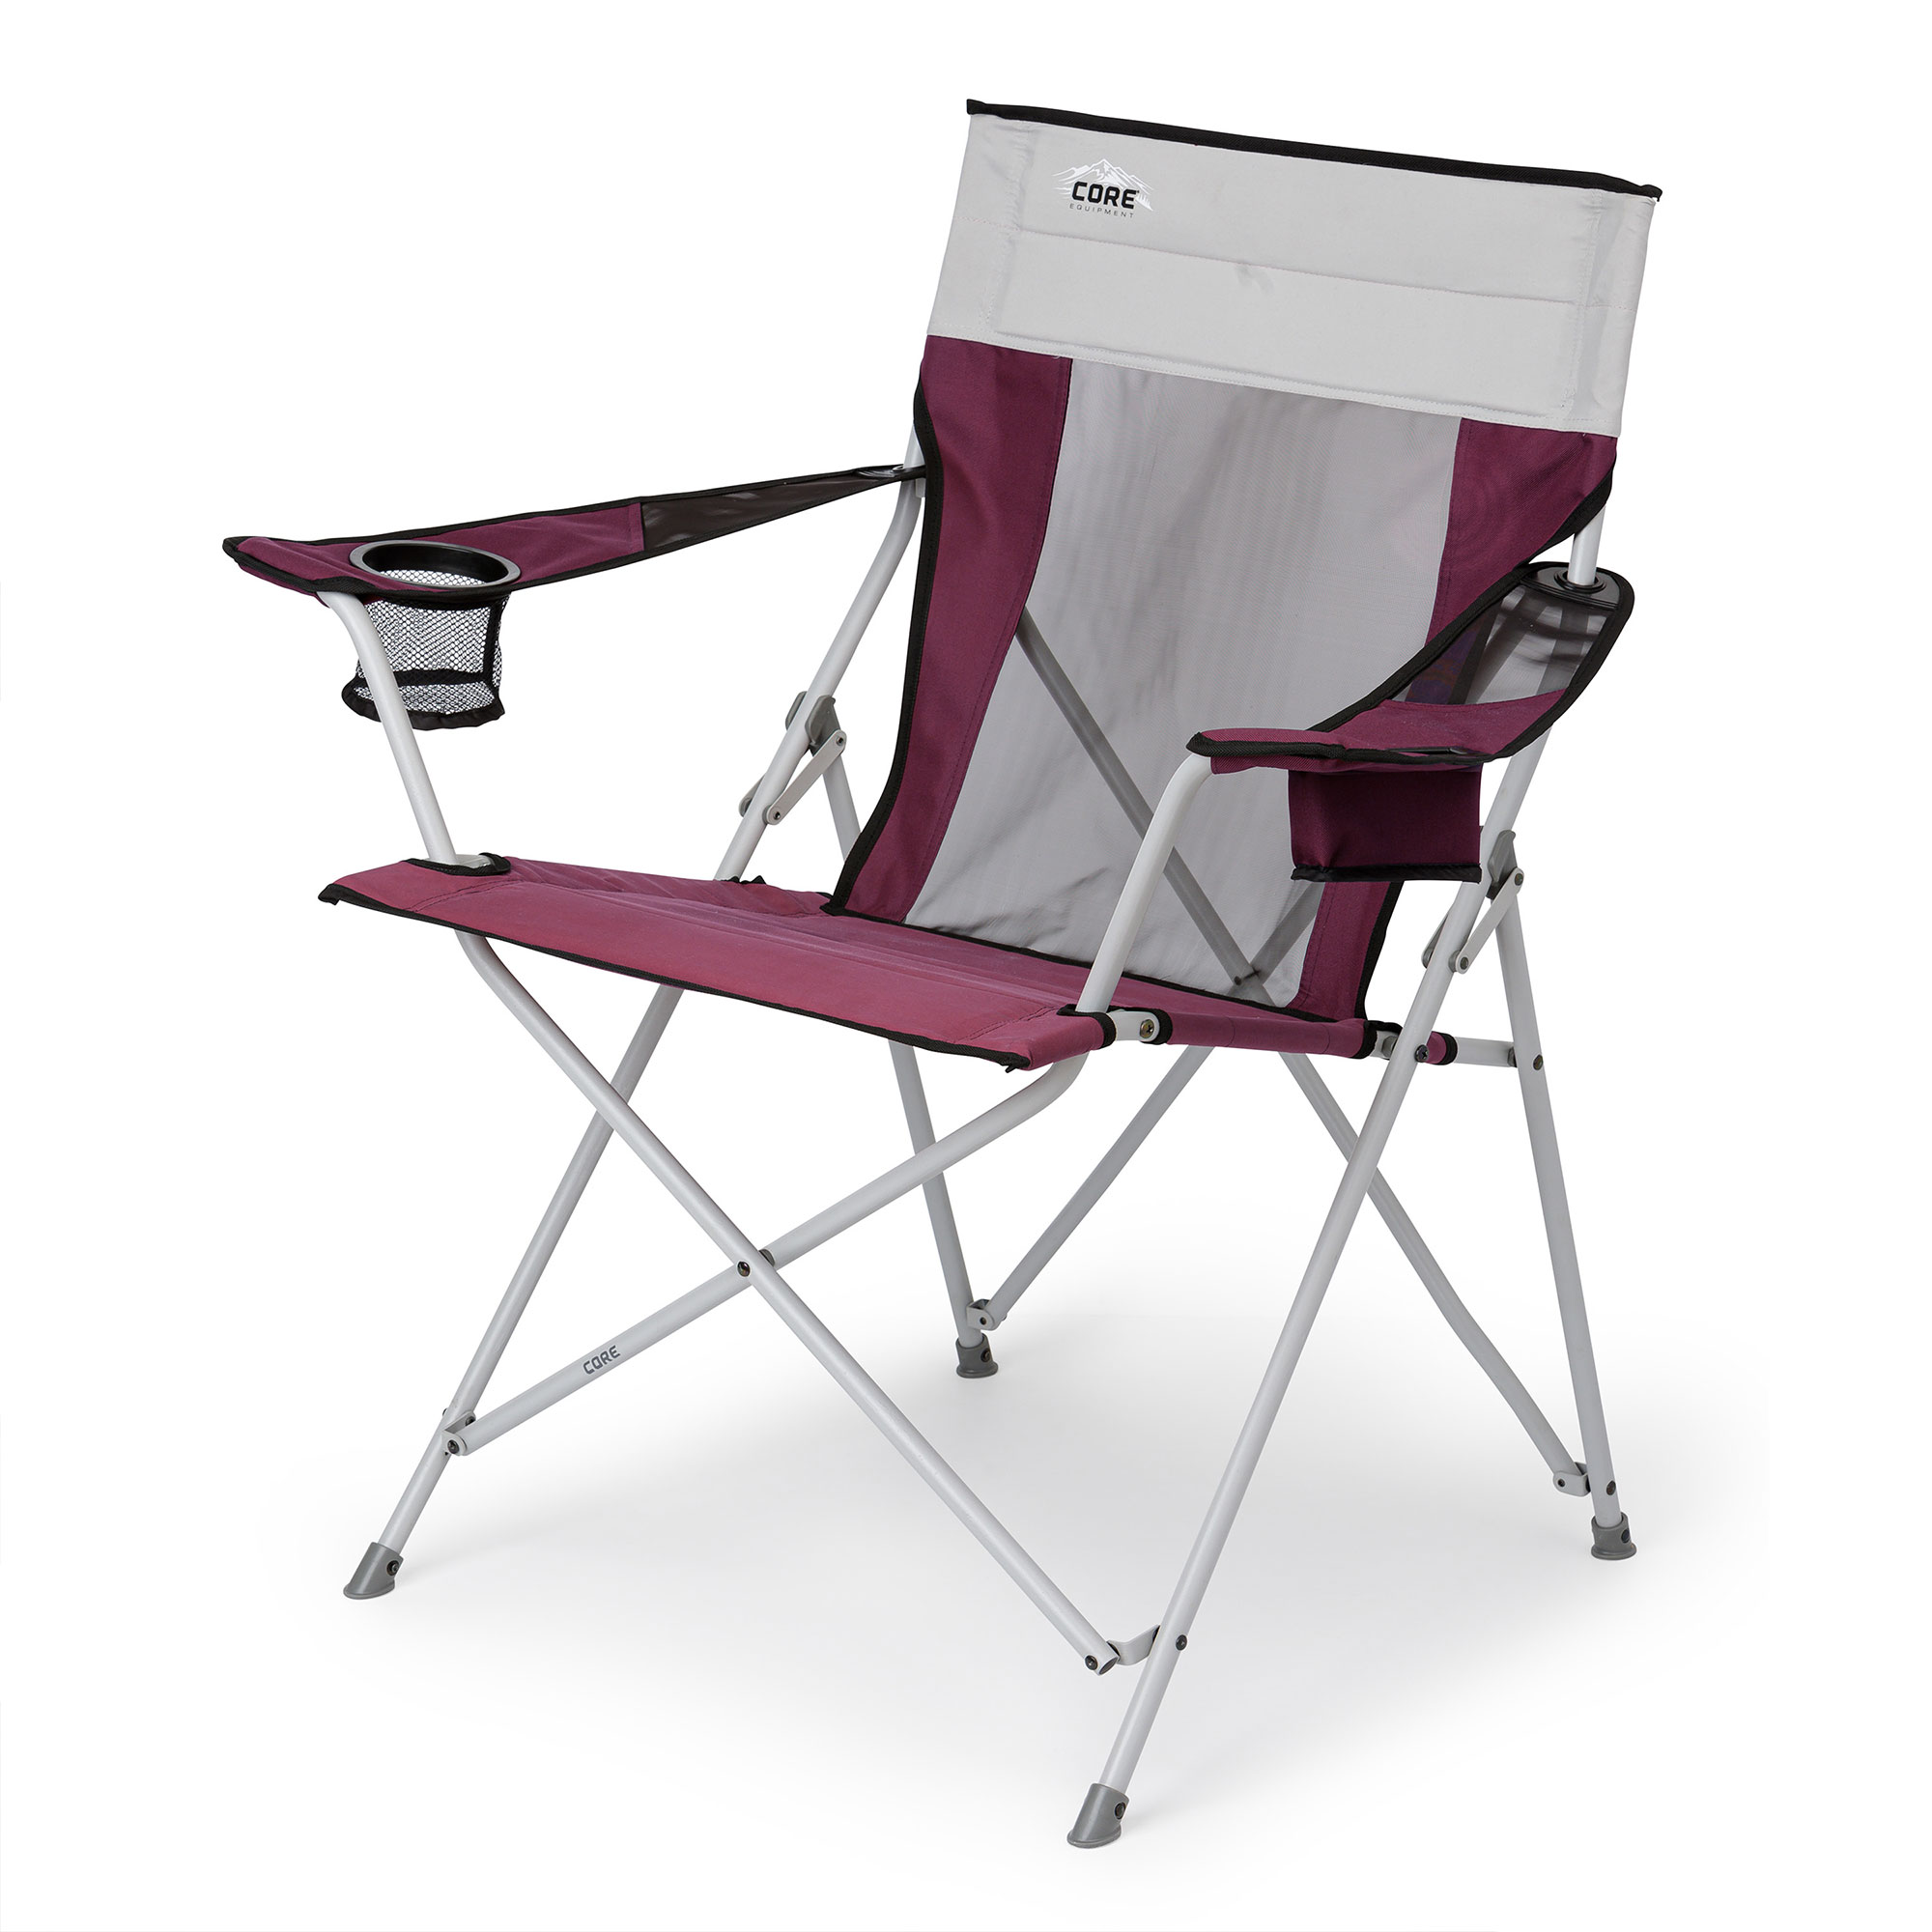 Core Portable Outdoor Camping Folding Chair with Carrying Storage Bag, Wine - image 1 of 6